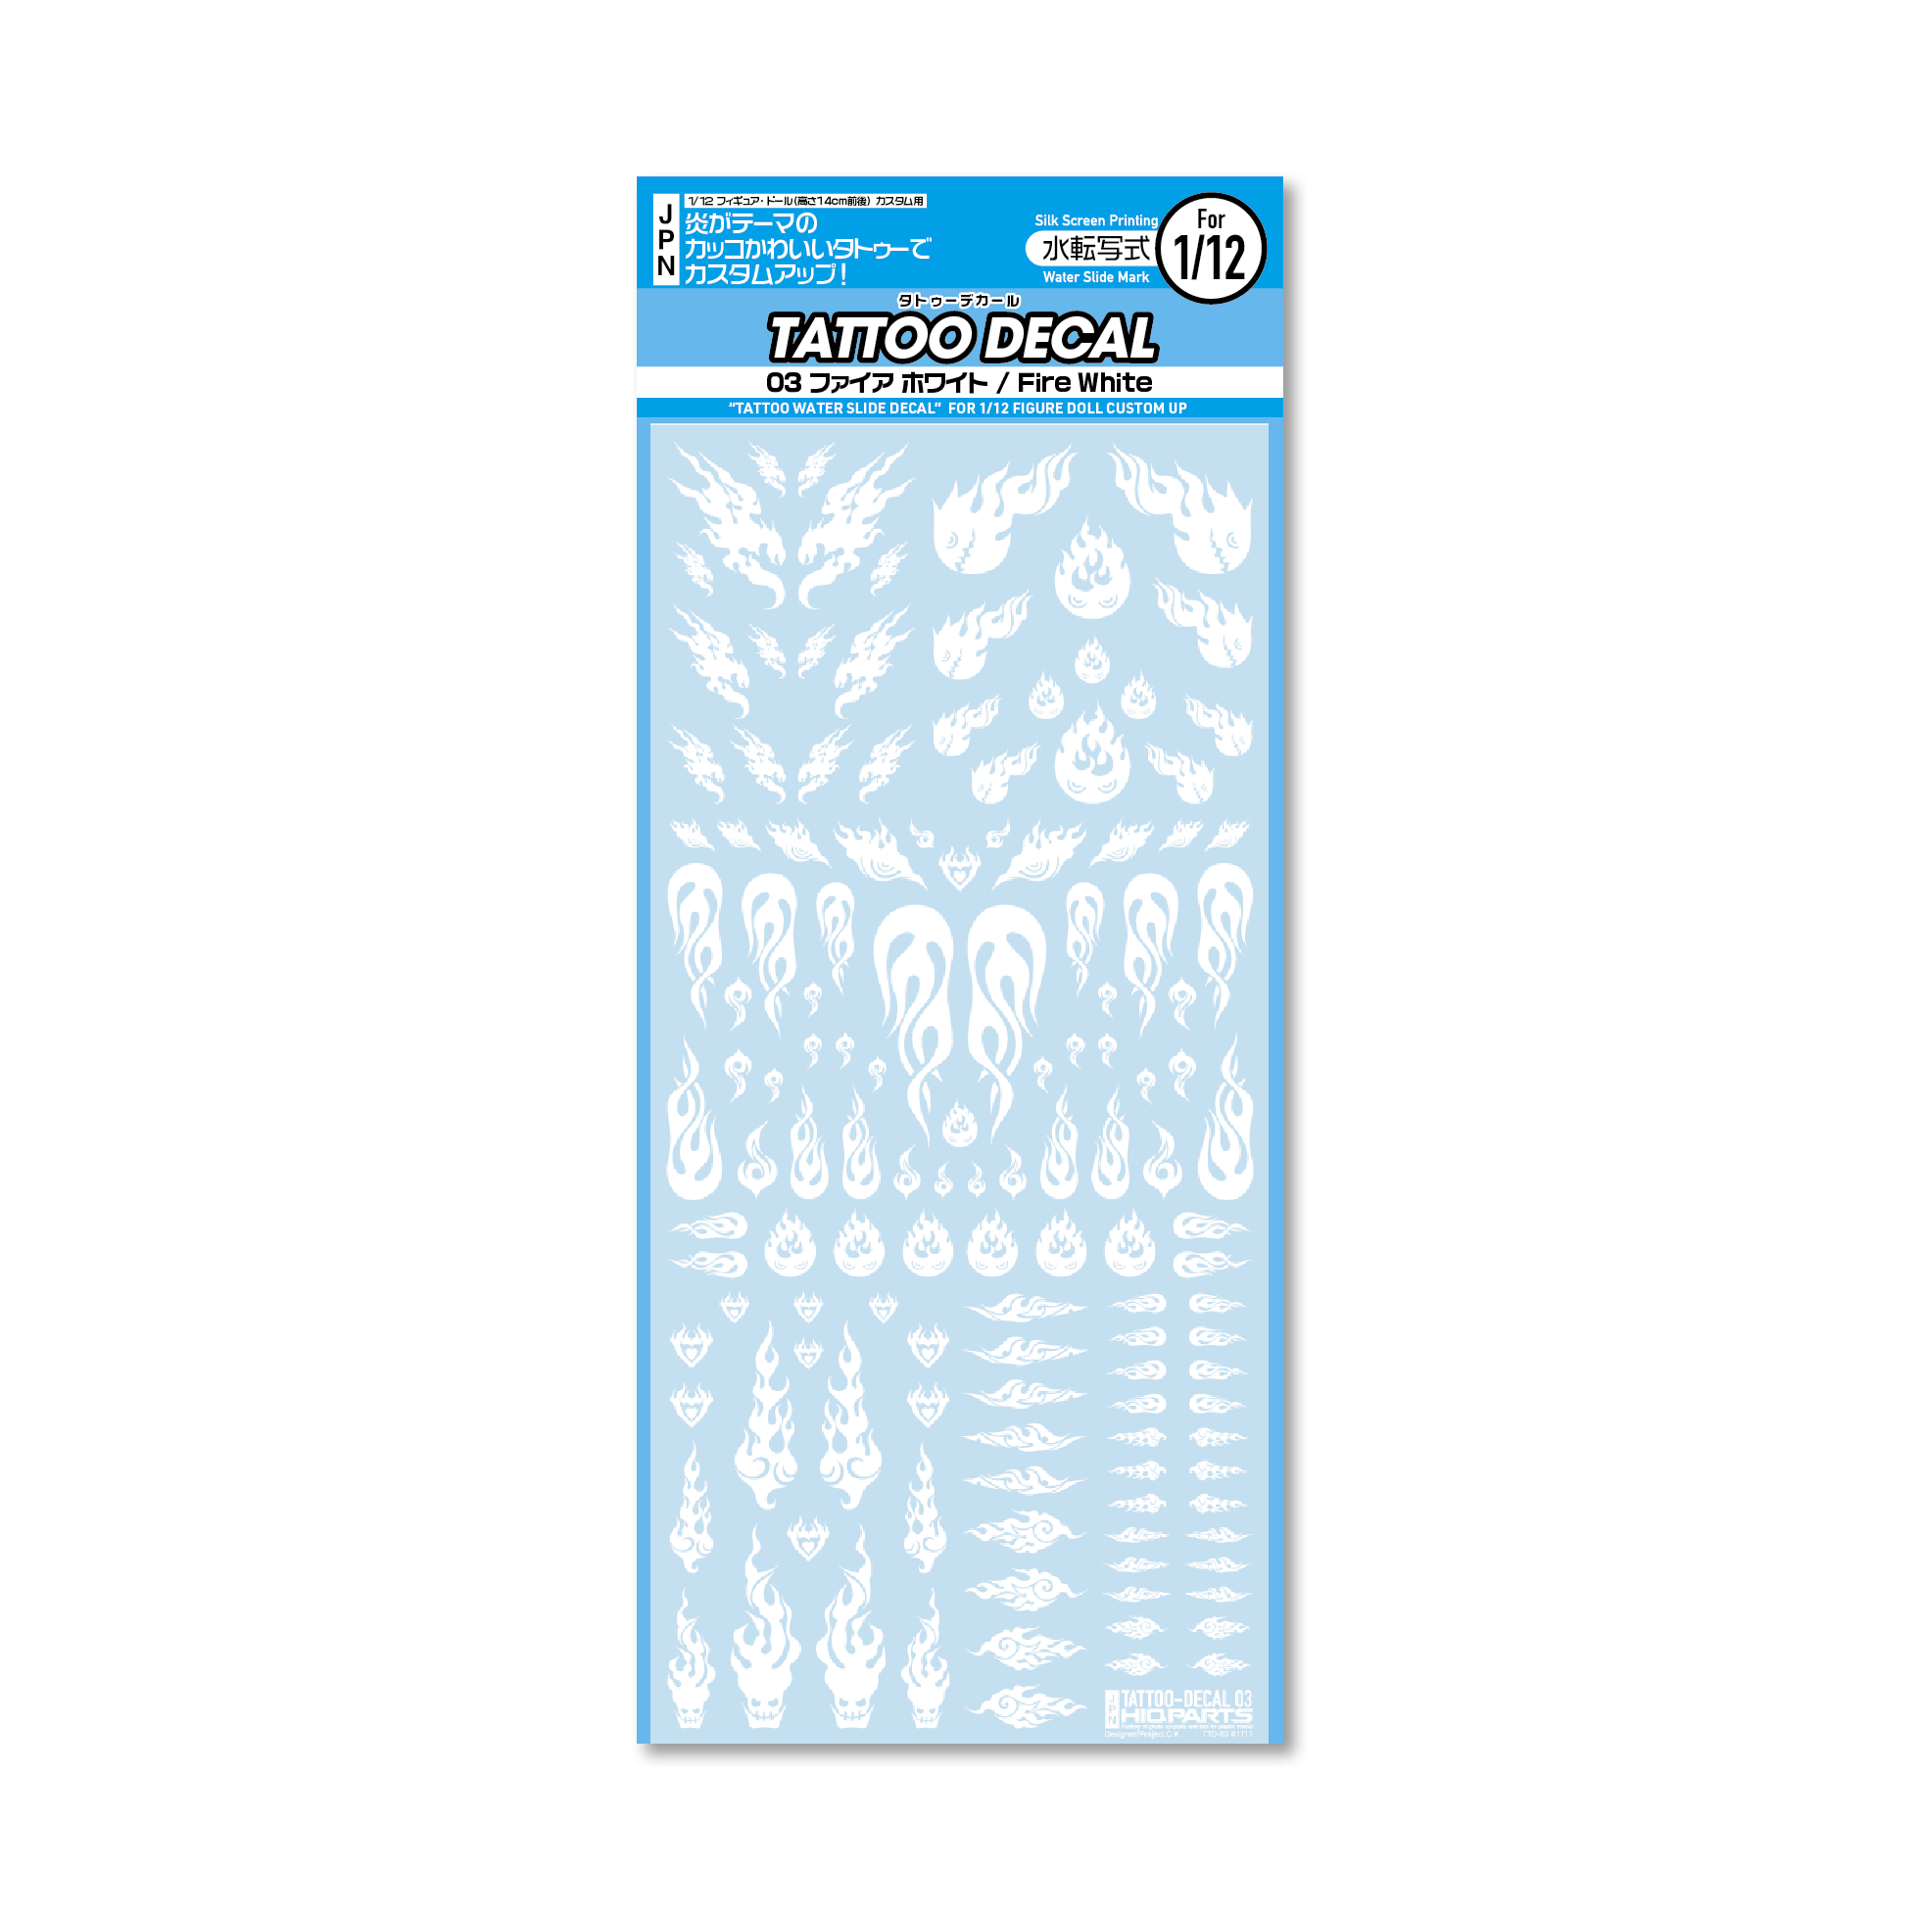 Pinewood Derby Car Decals - Flames